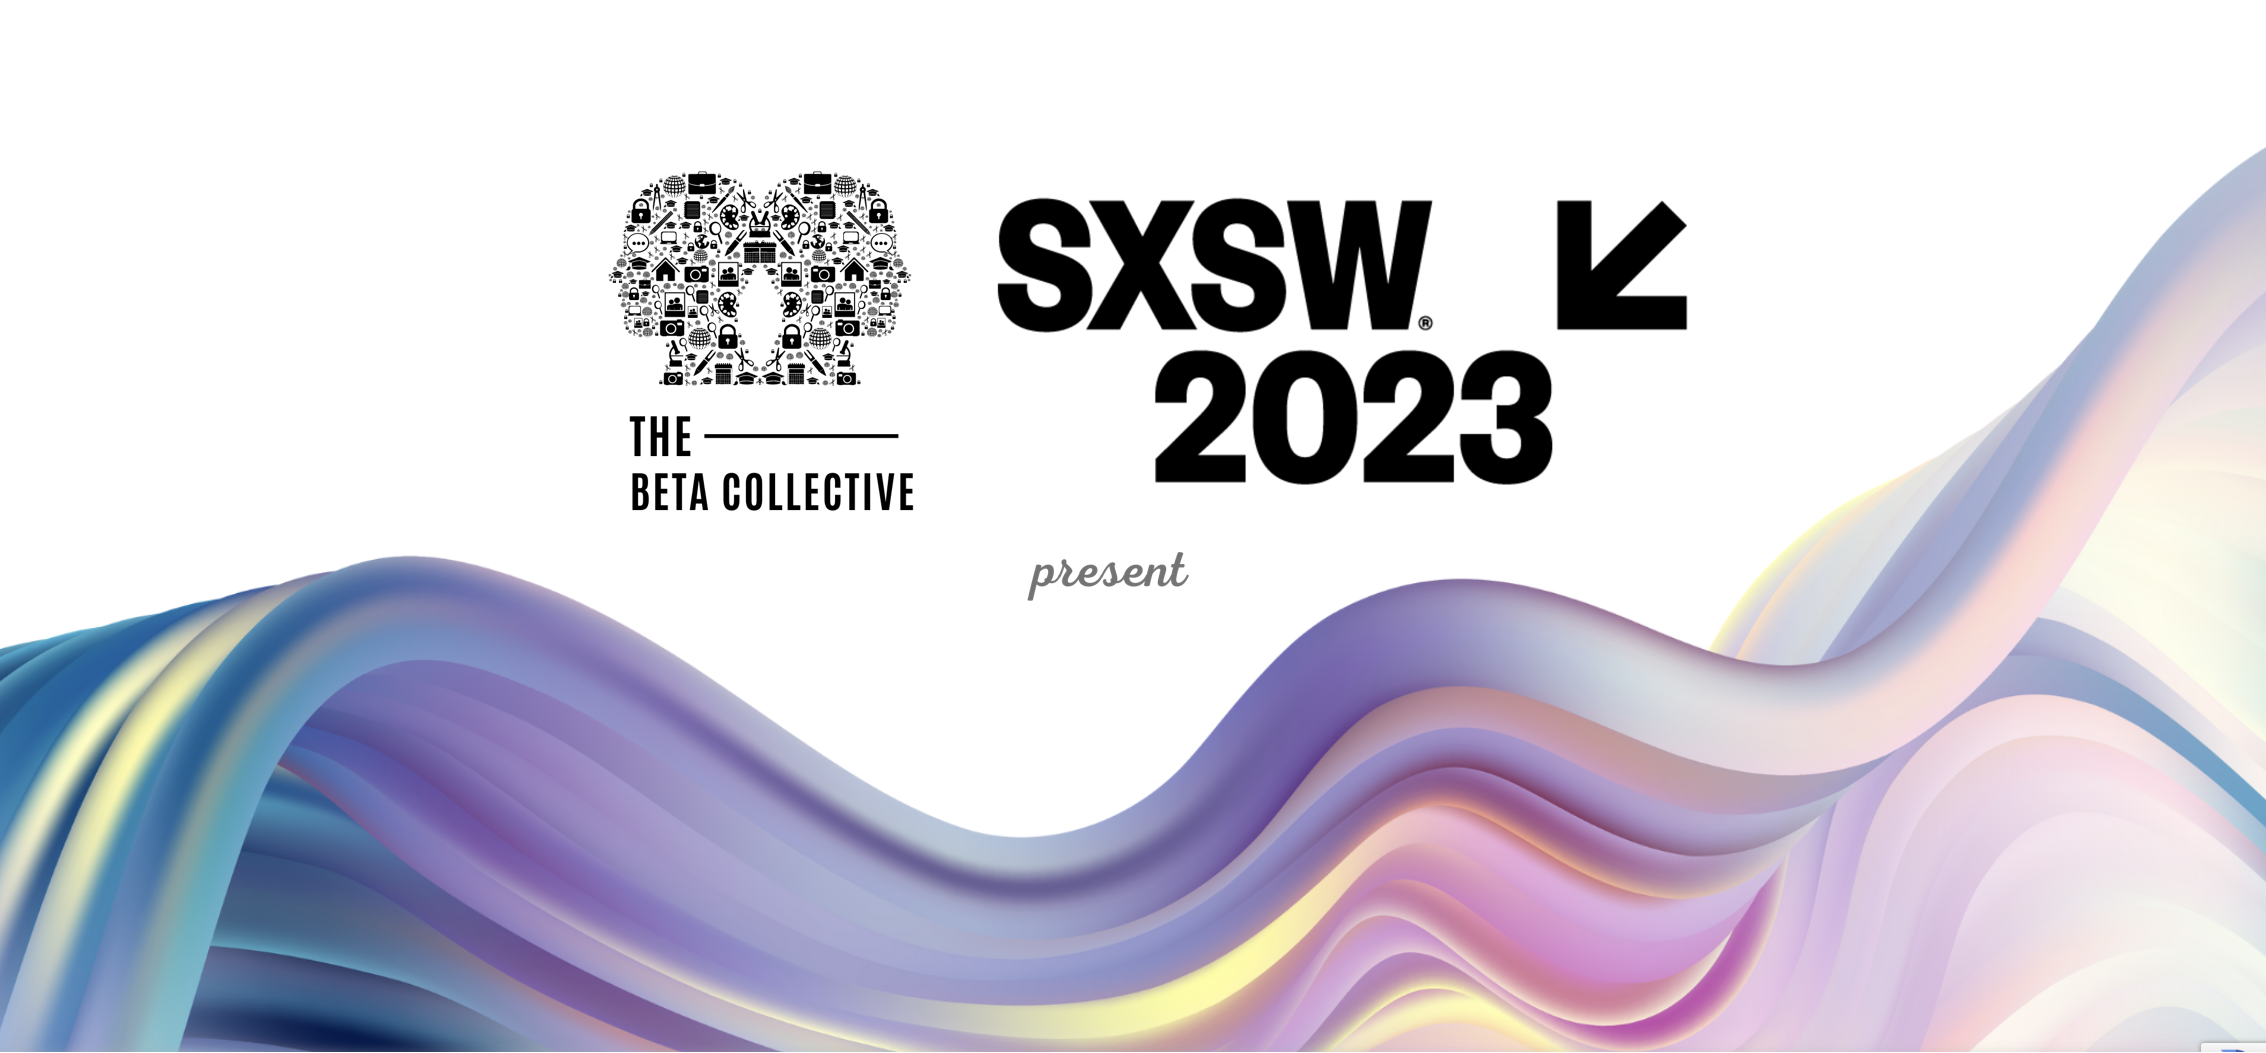 🗞️ The Beta Collective is hosting an Official SXSW 2023 event